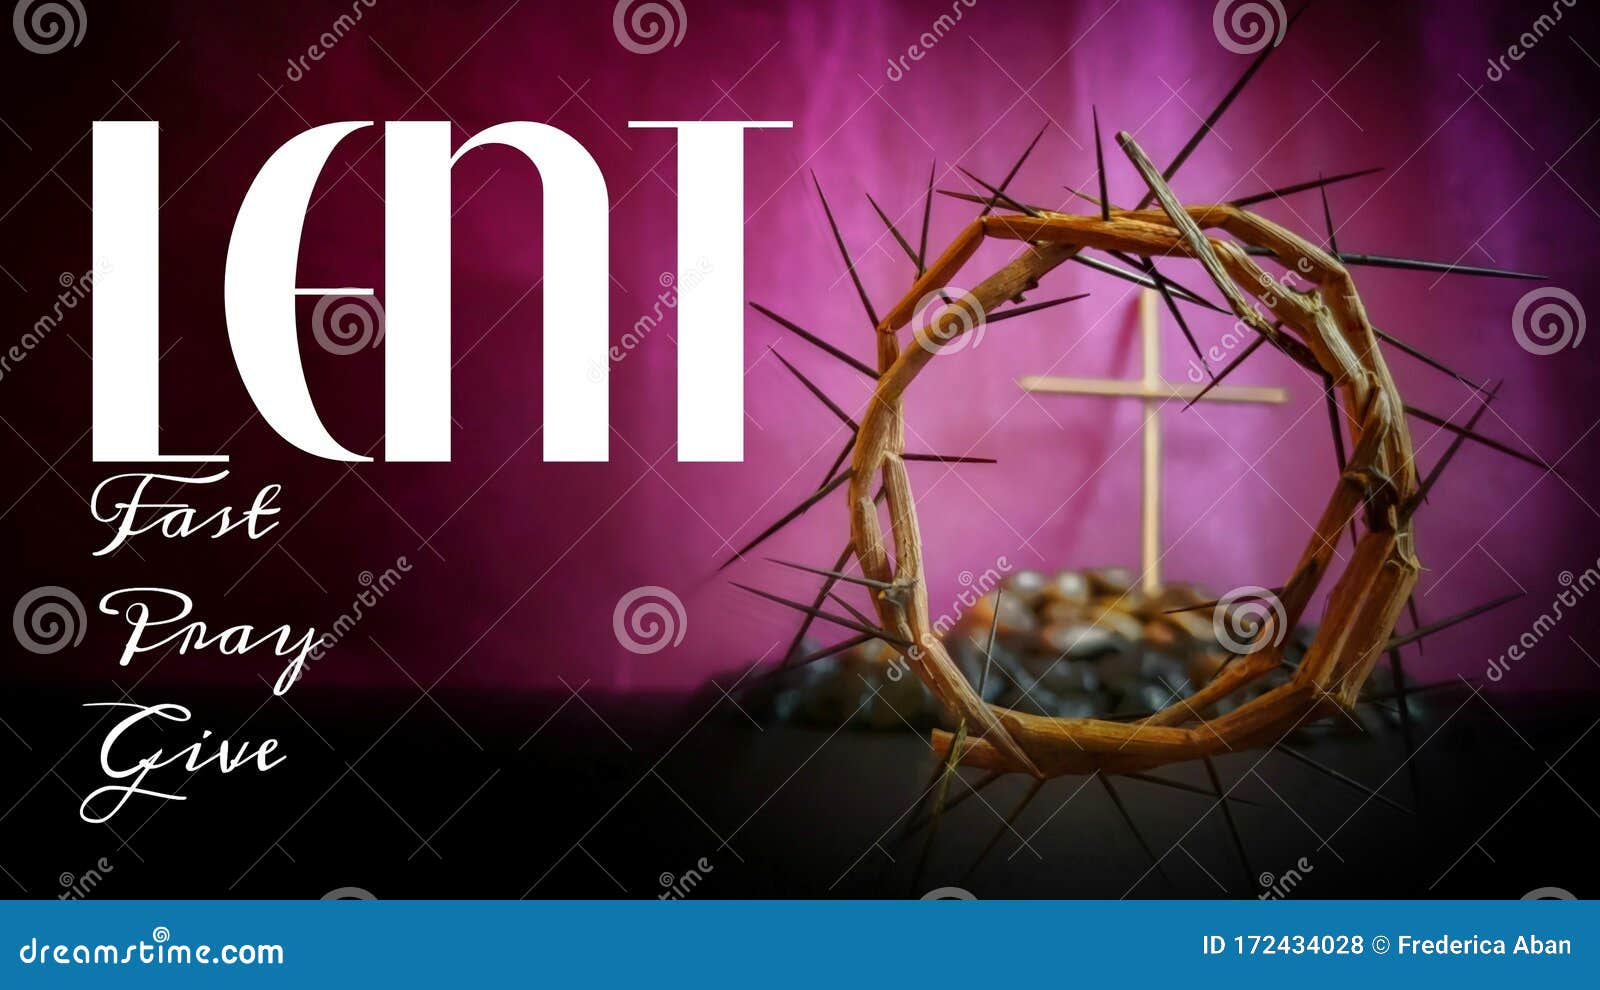 lent season,holy week and good friday  - text lent fast pray give with vintage background